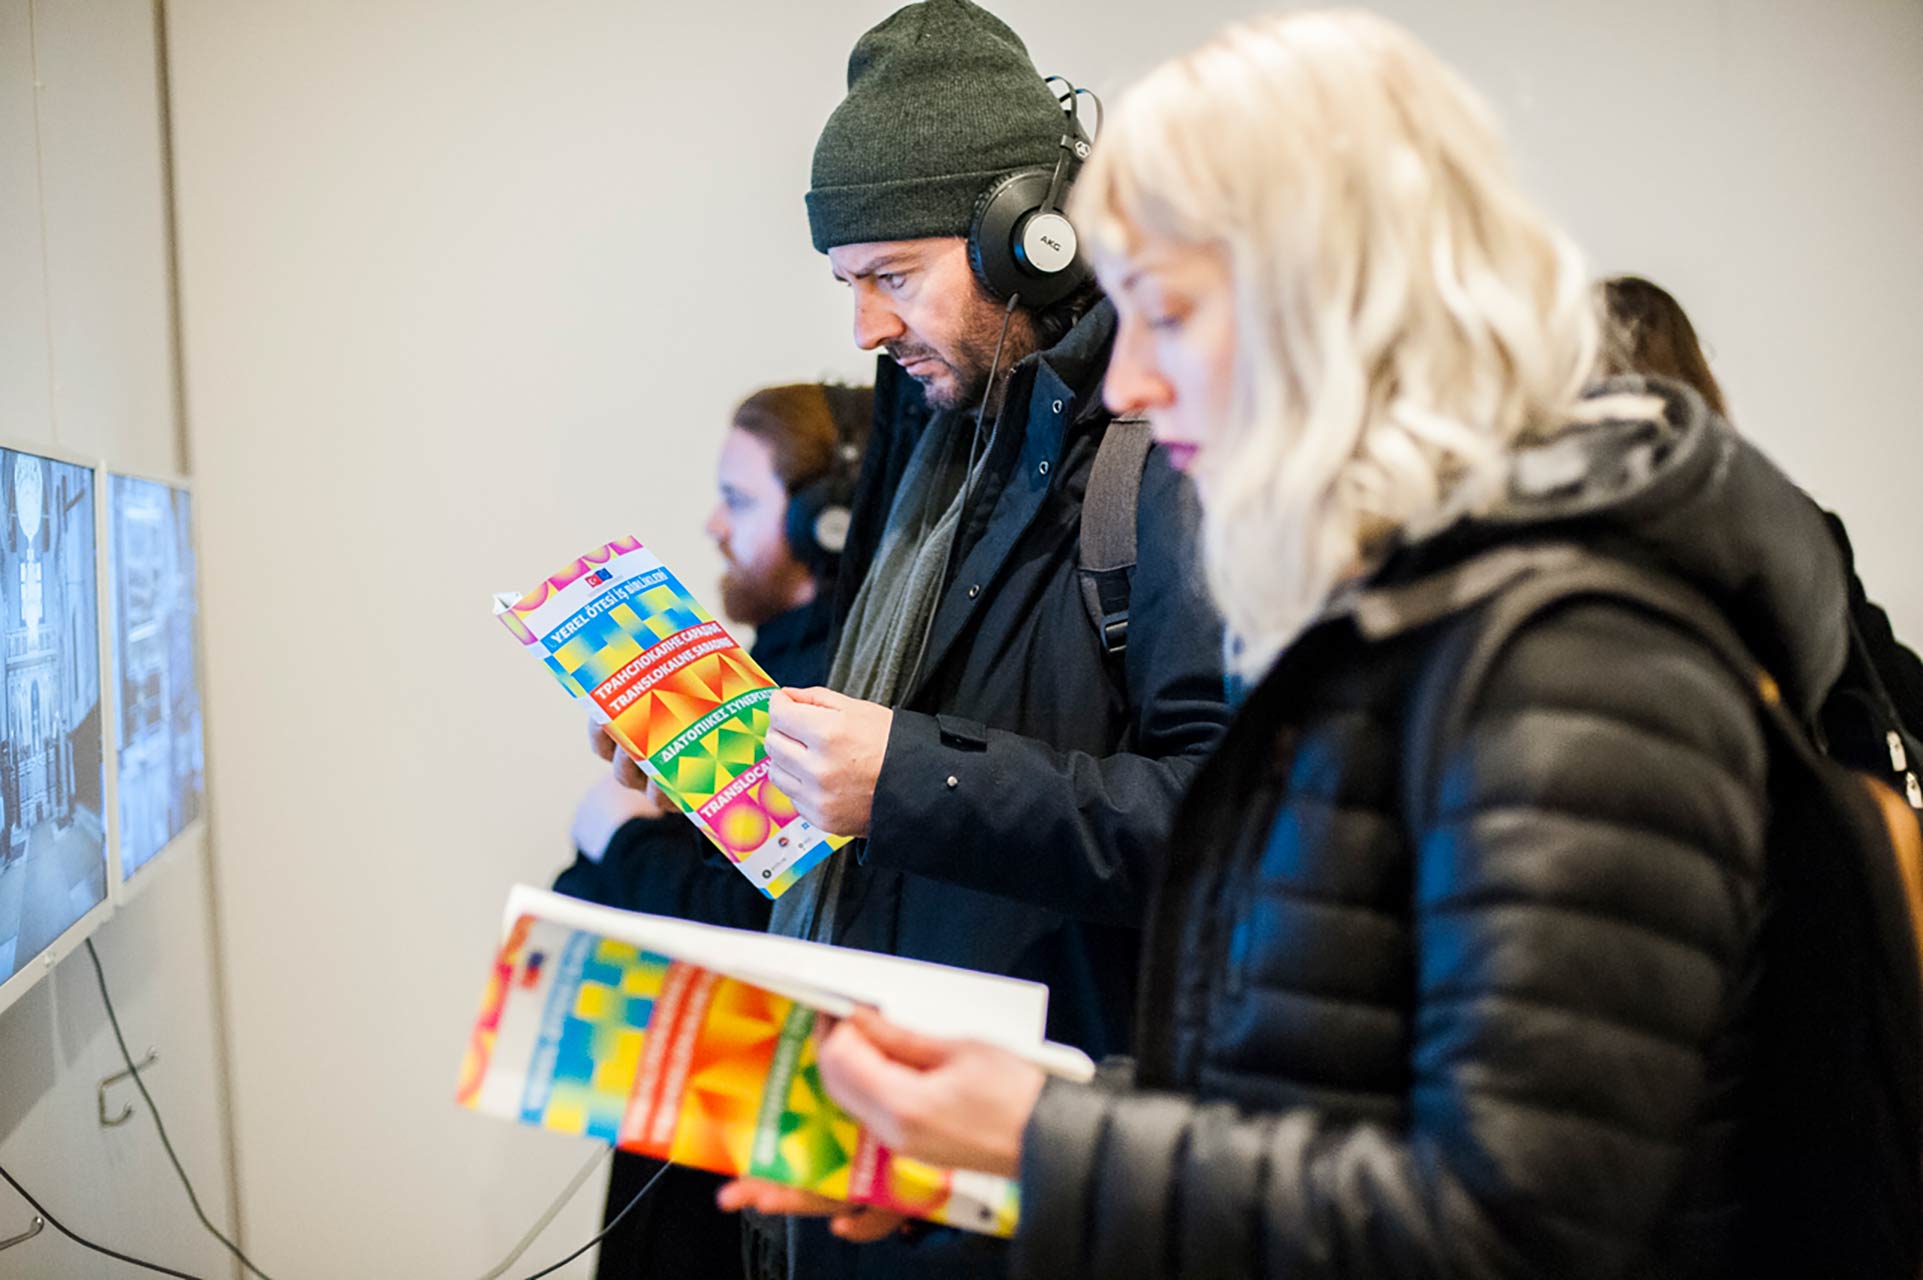 Members of the public are seen watching video artworks, while reading and holding copies of the Trans Local booklet